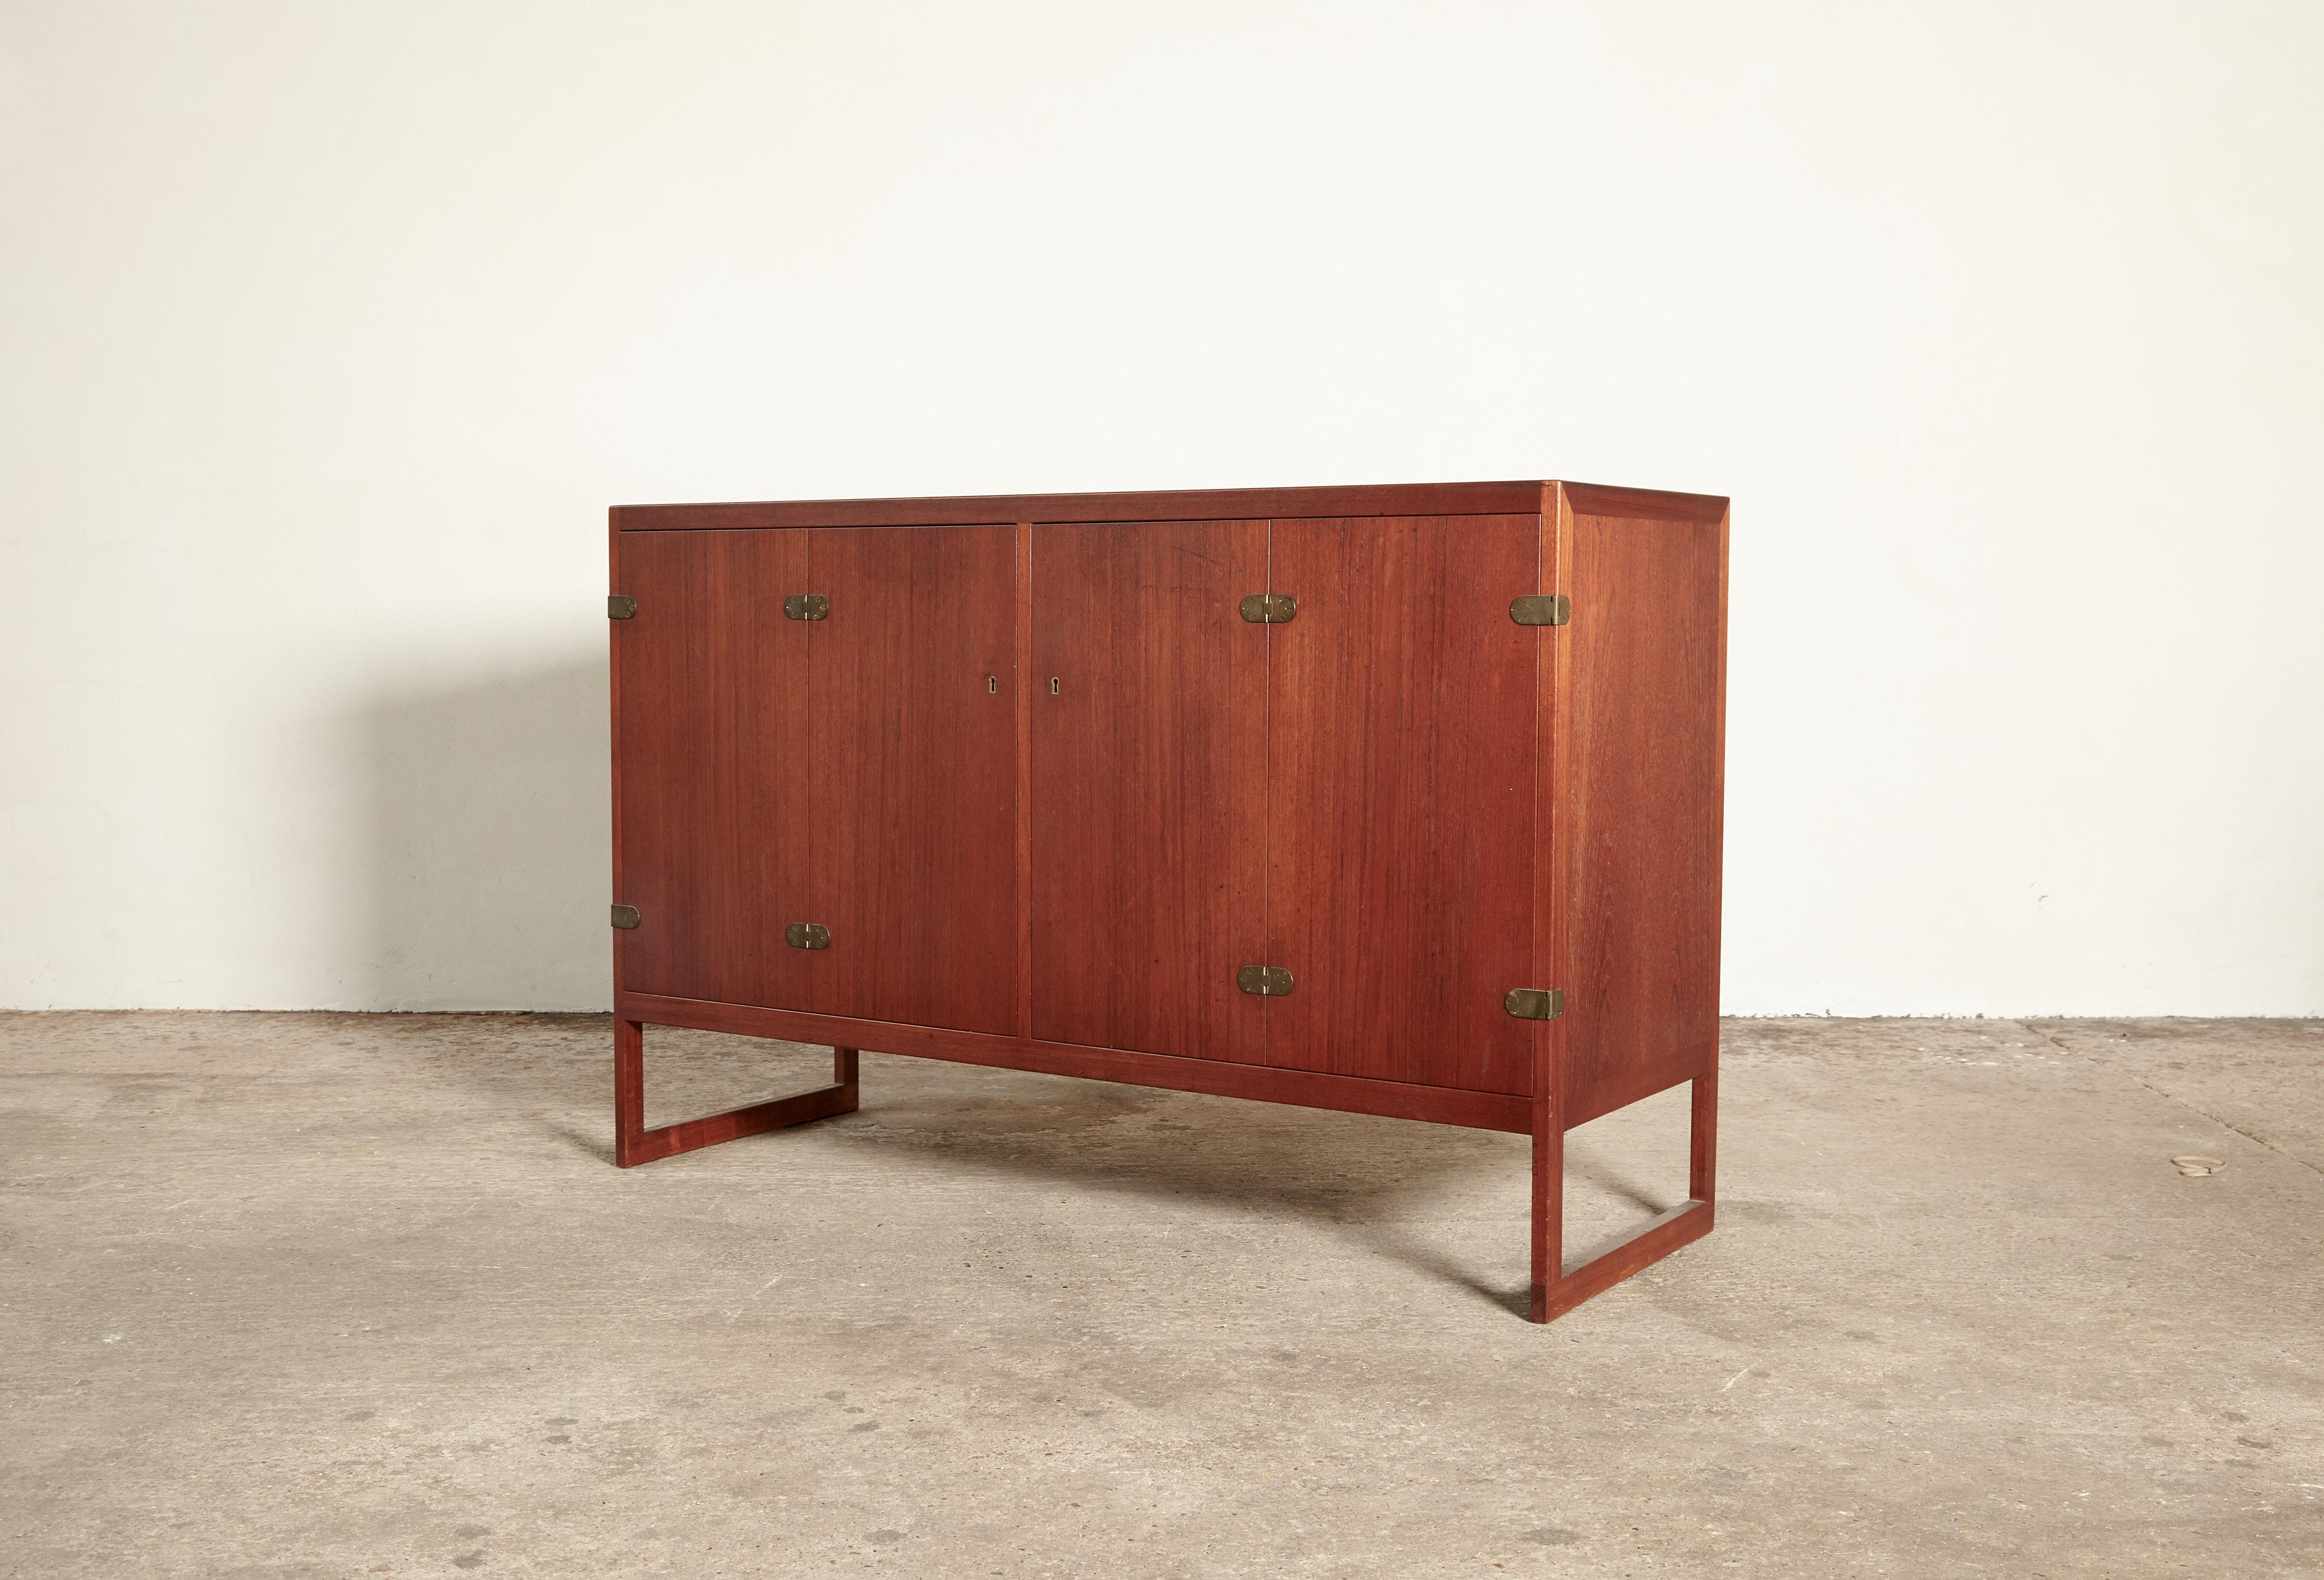 Rare cabinet or sideboard in teak with brass details designed by Børge Mogensen for P. Lauritsen & Søn, 1957, Denmark. Features two bi-fold doors concealing two adjustable shelves and four drawers in oak. With one key.   Ships worldwide - please